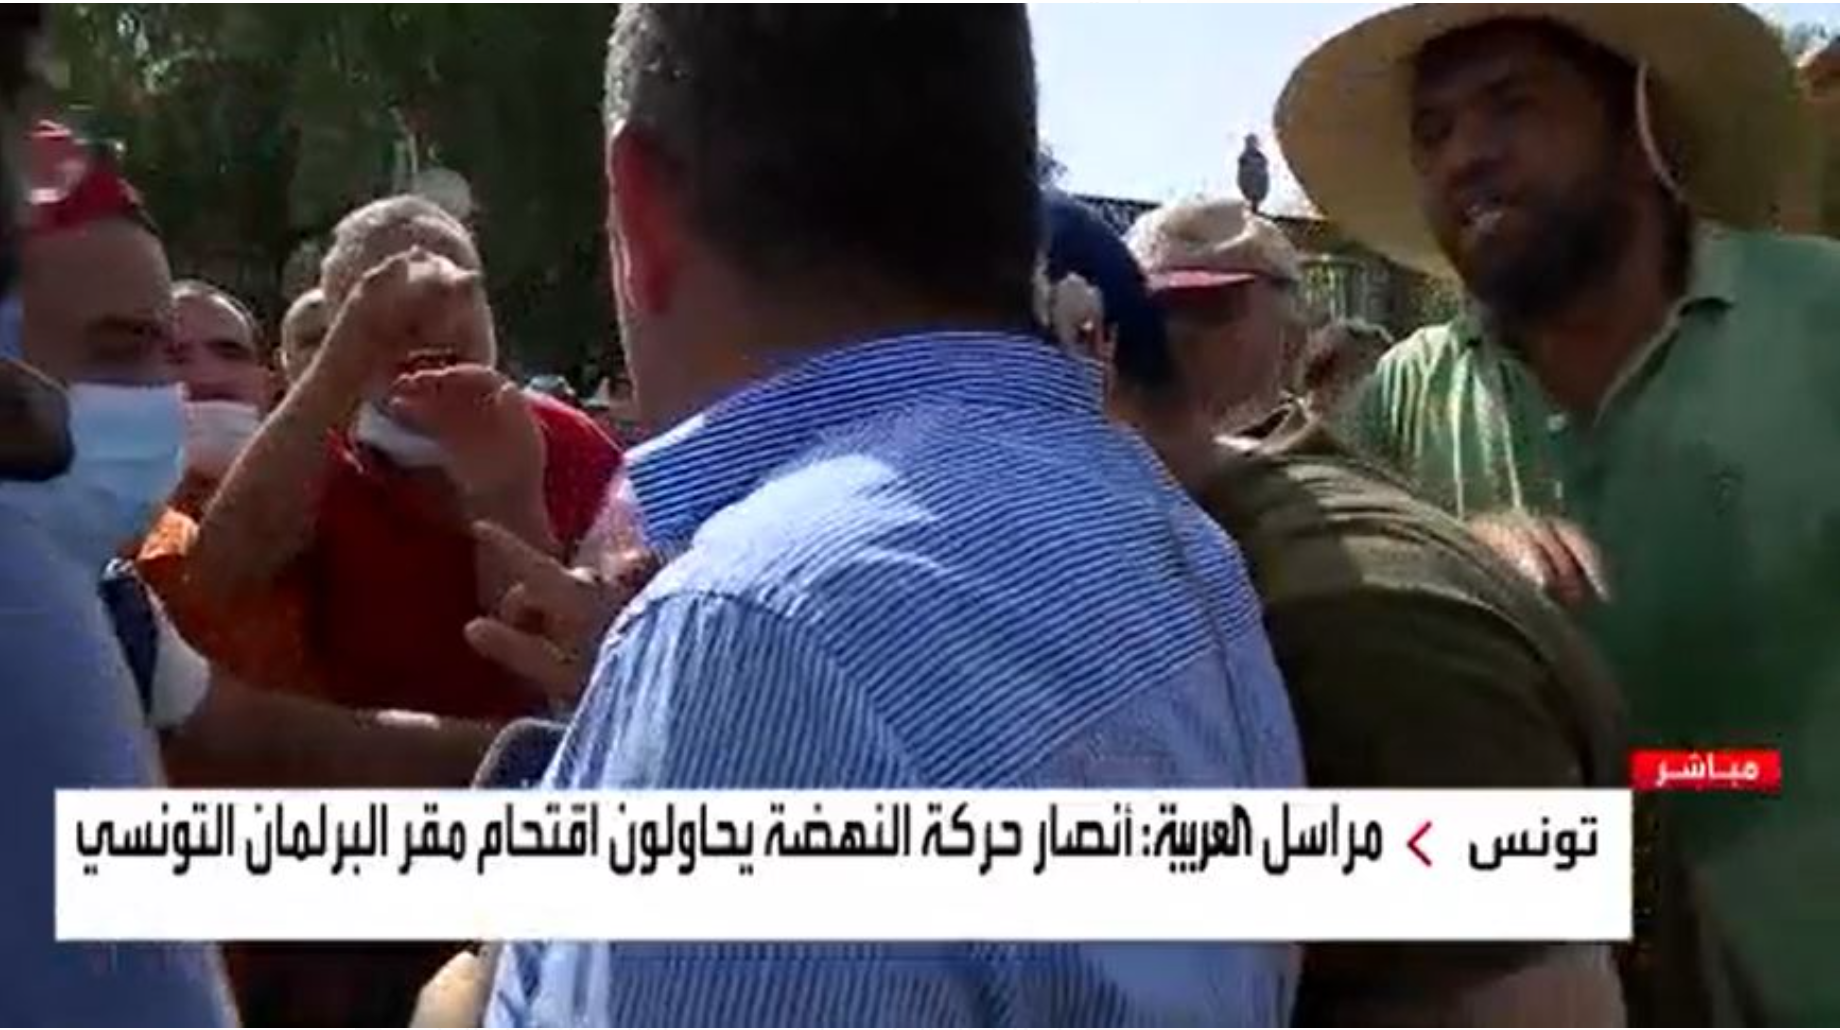 An attempt by Ennahda supporters to attack a reporter "Arabic" Before Parliament